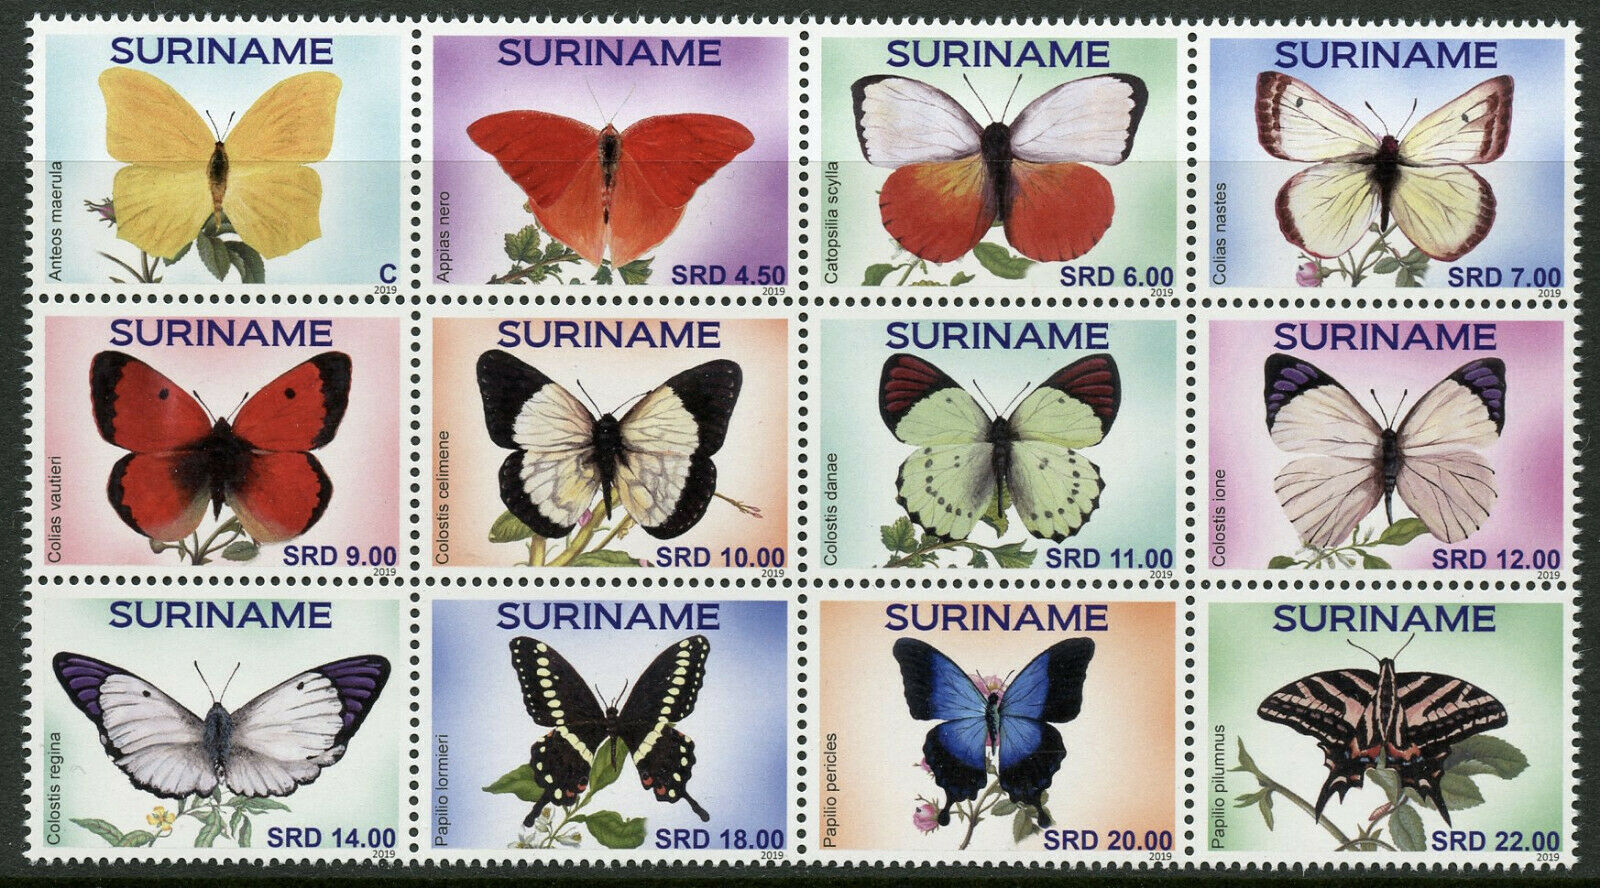 Suriname Butterflies Stamps 2019 MNH Butterfly Insects 12v Block